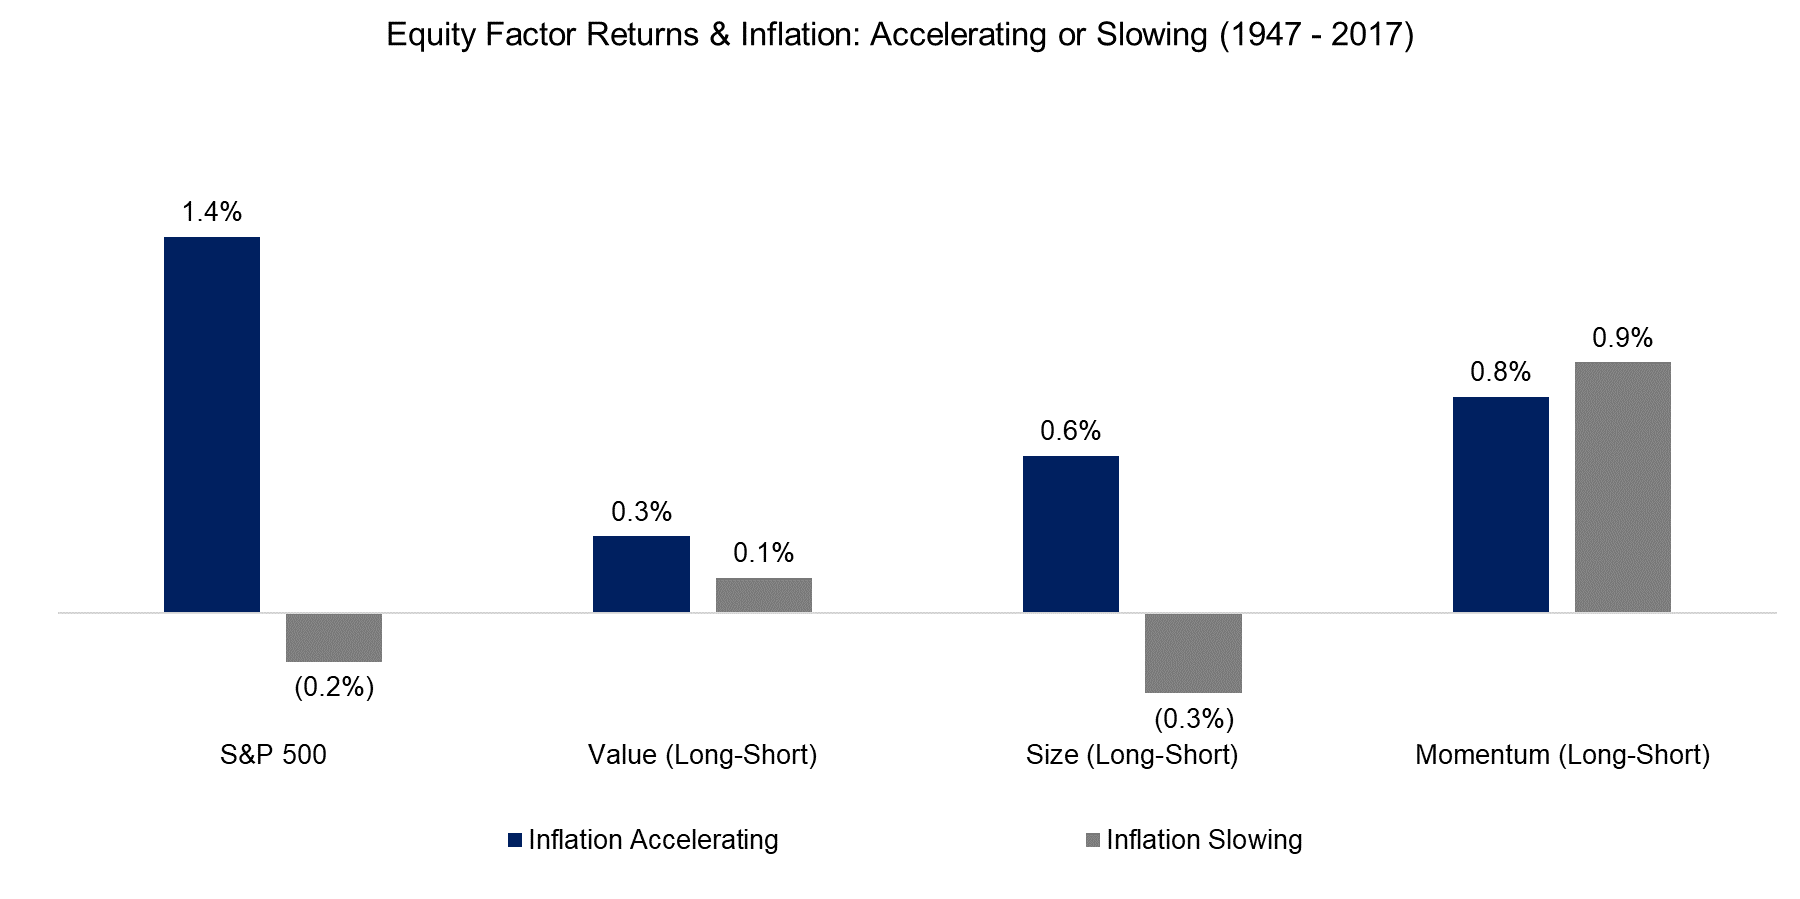 Equity Factor Returns & Inflation Accelerating or Slowing (1947 - 2017)